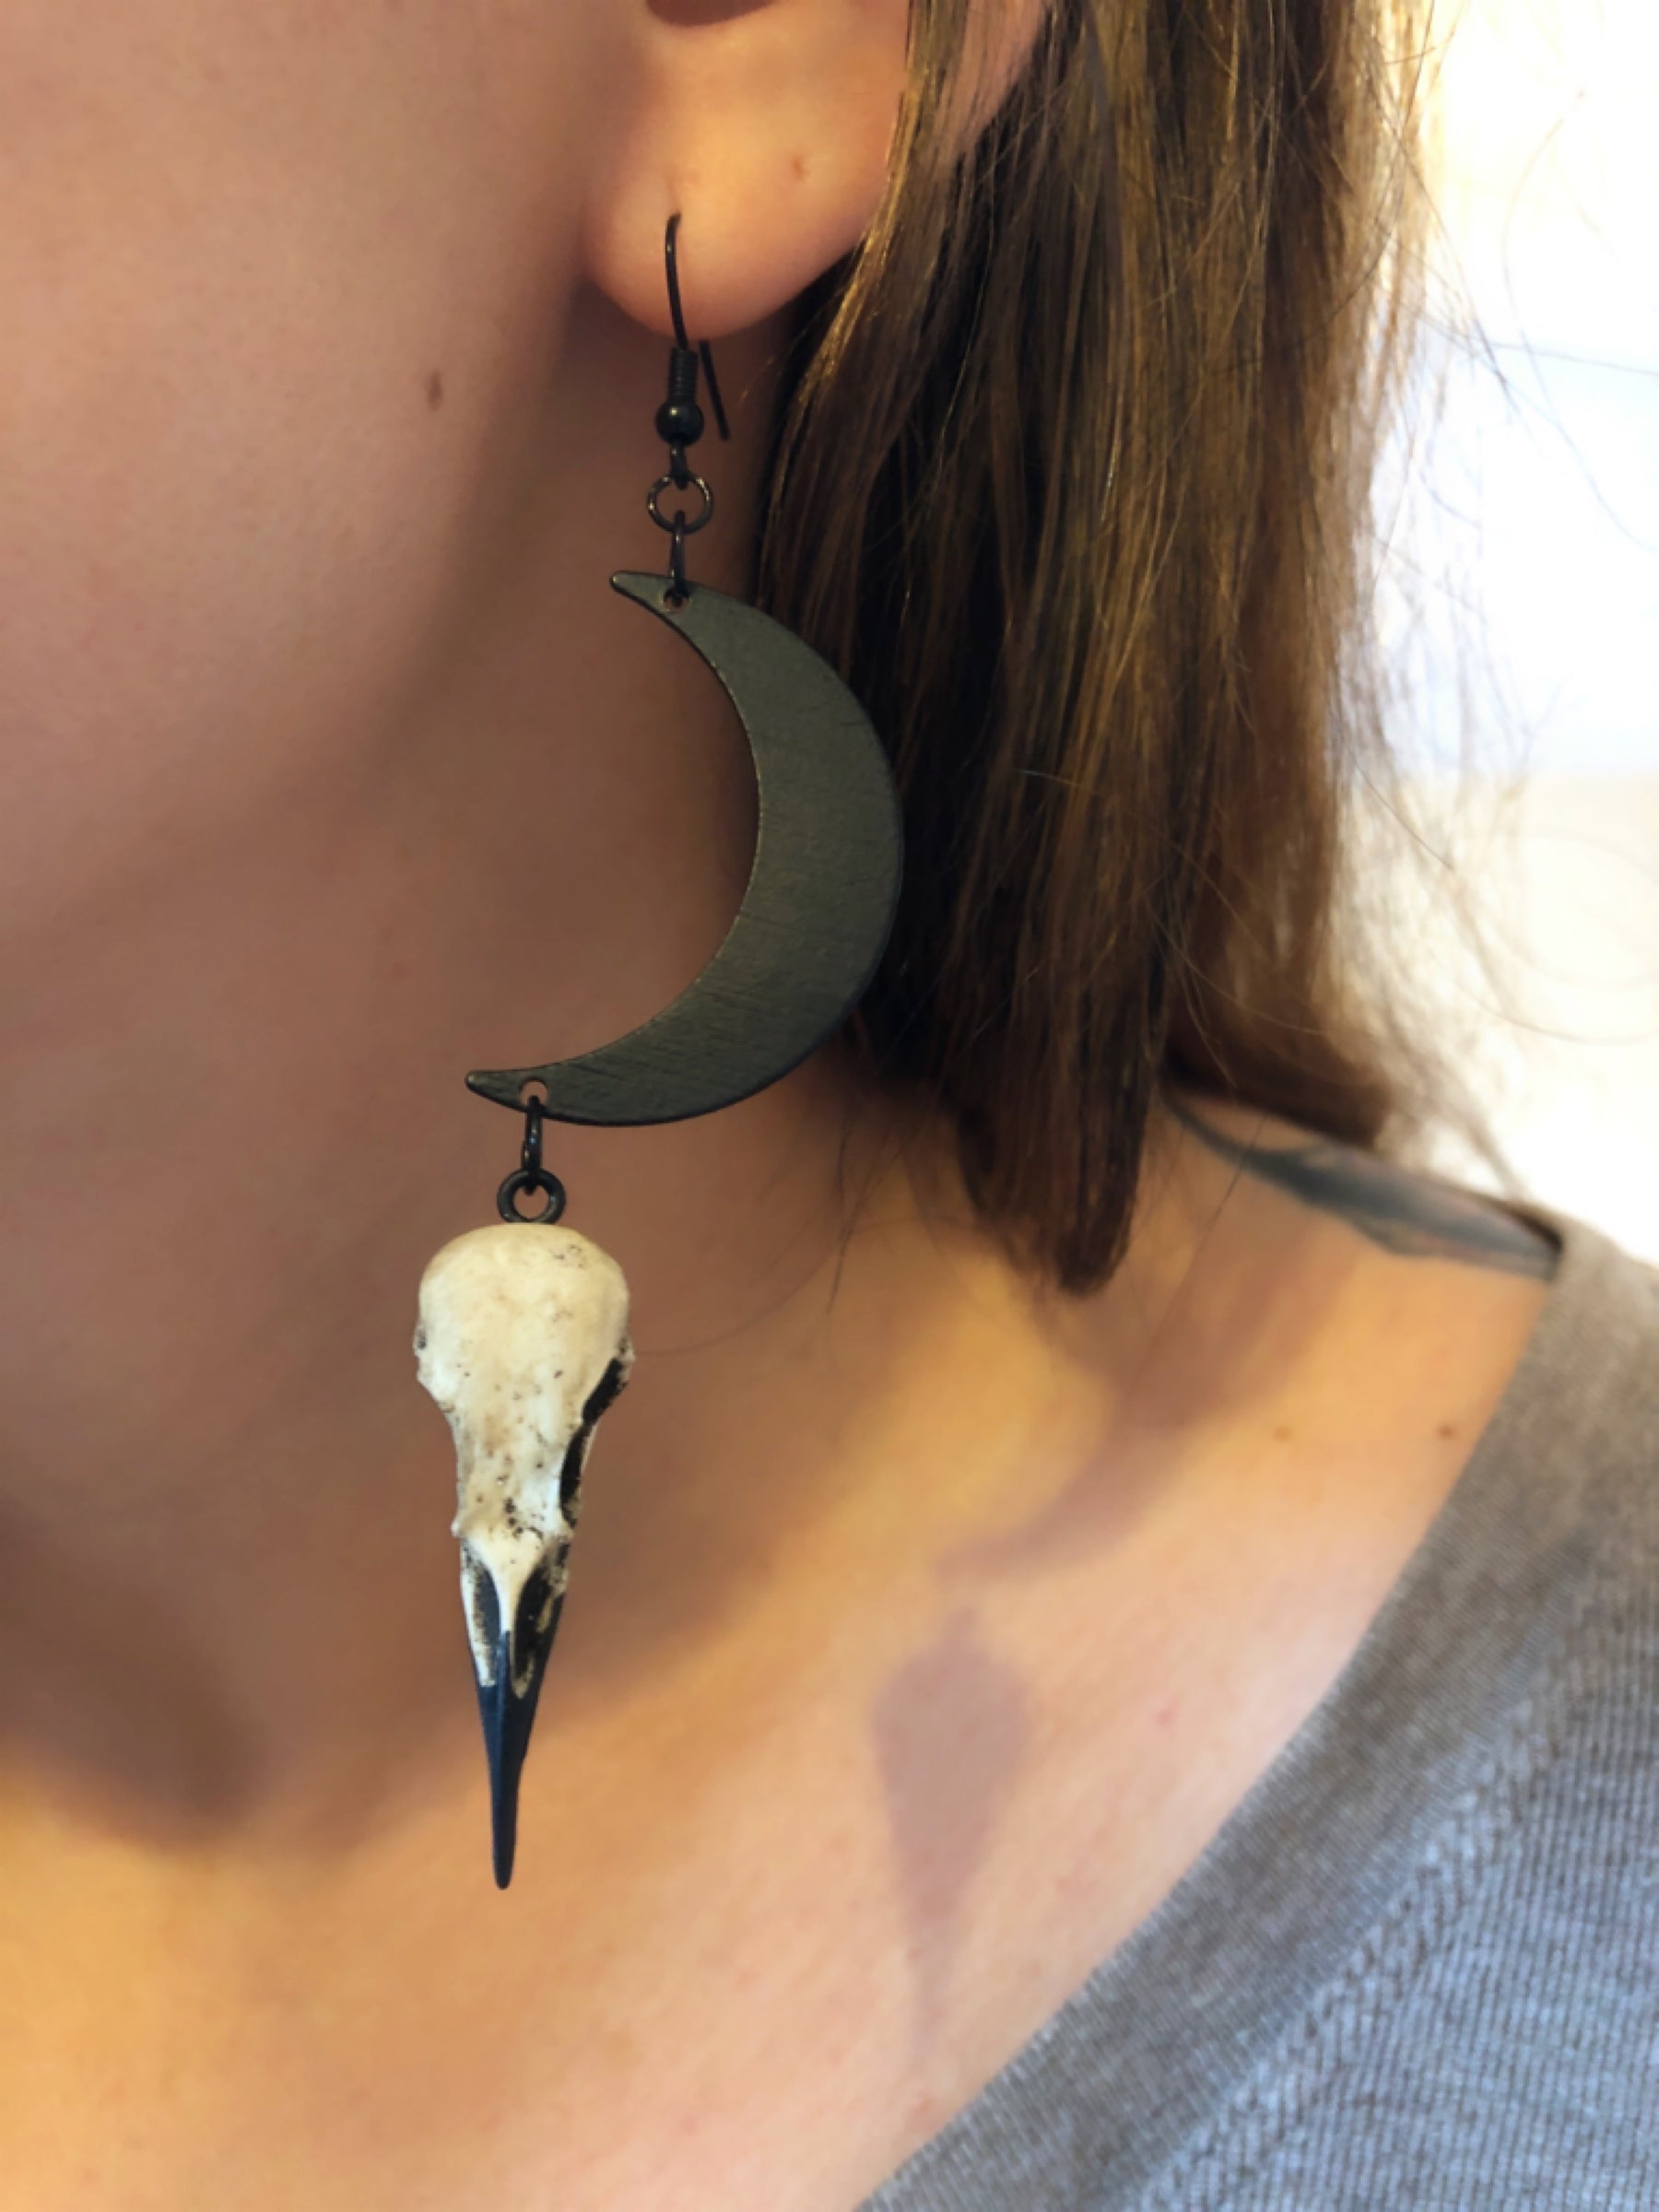 goth woman wearing gift idea Dangle earlobe raven goth skull charm earrings with crescent moons and resin bird skulls.